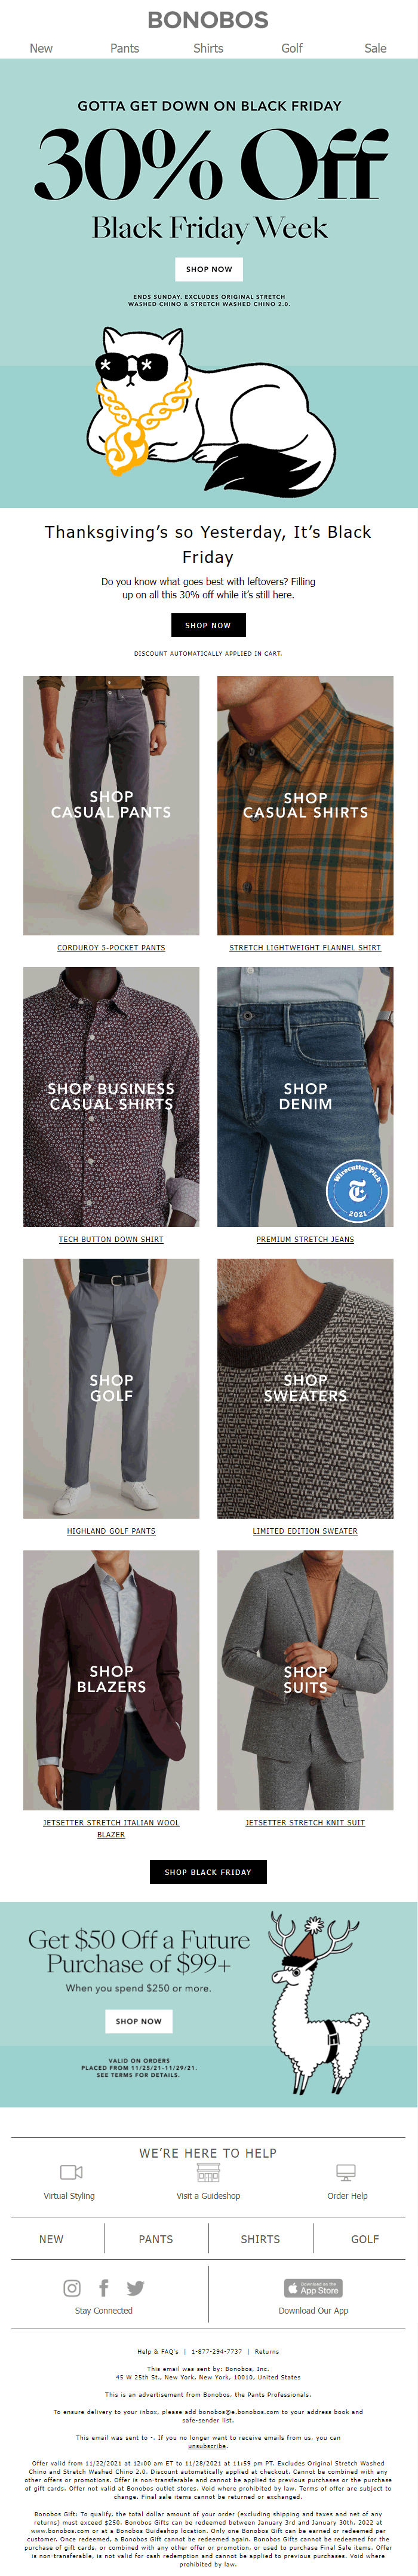 Black Friday email from Bonobos